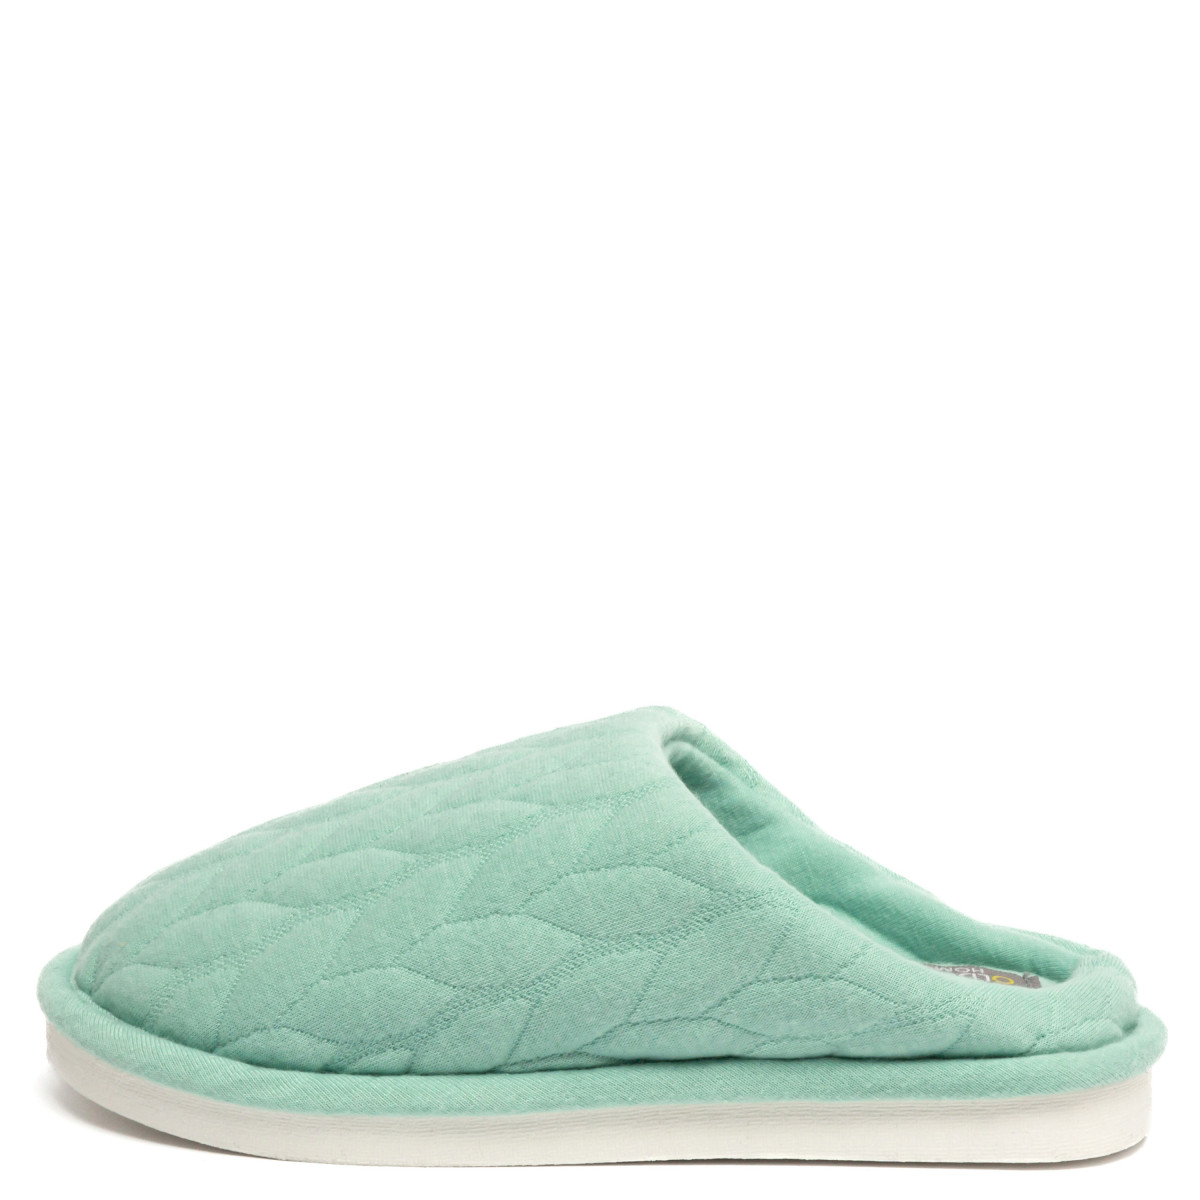 Kid's home slippers FAMILY, Mint